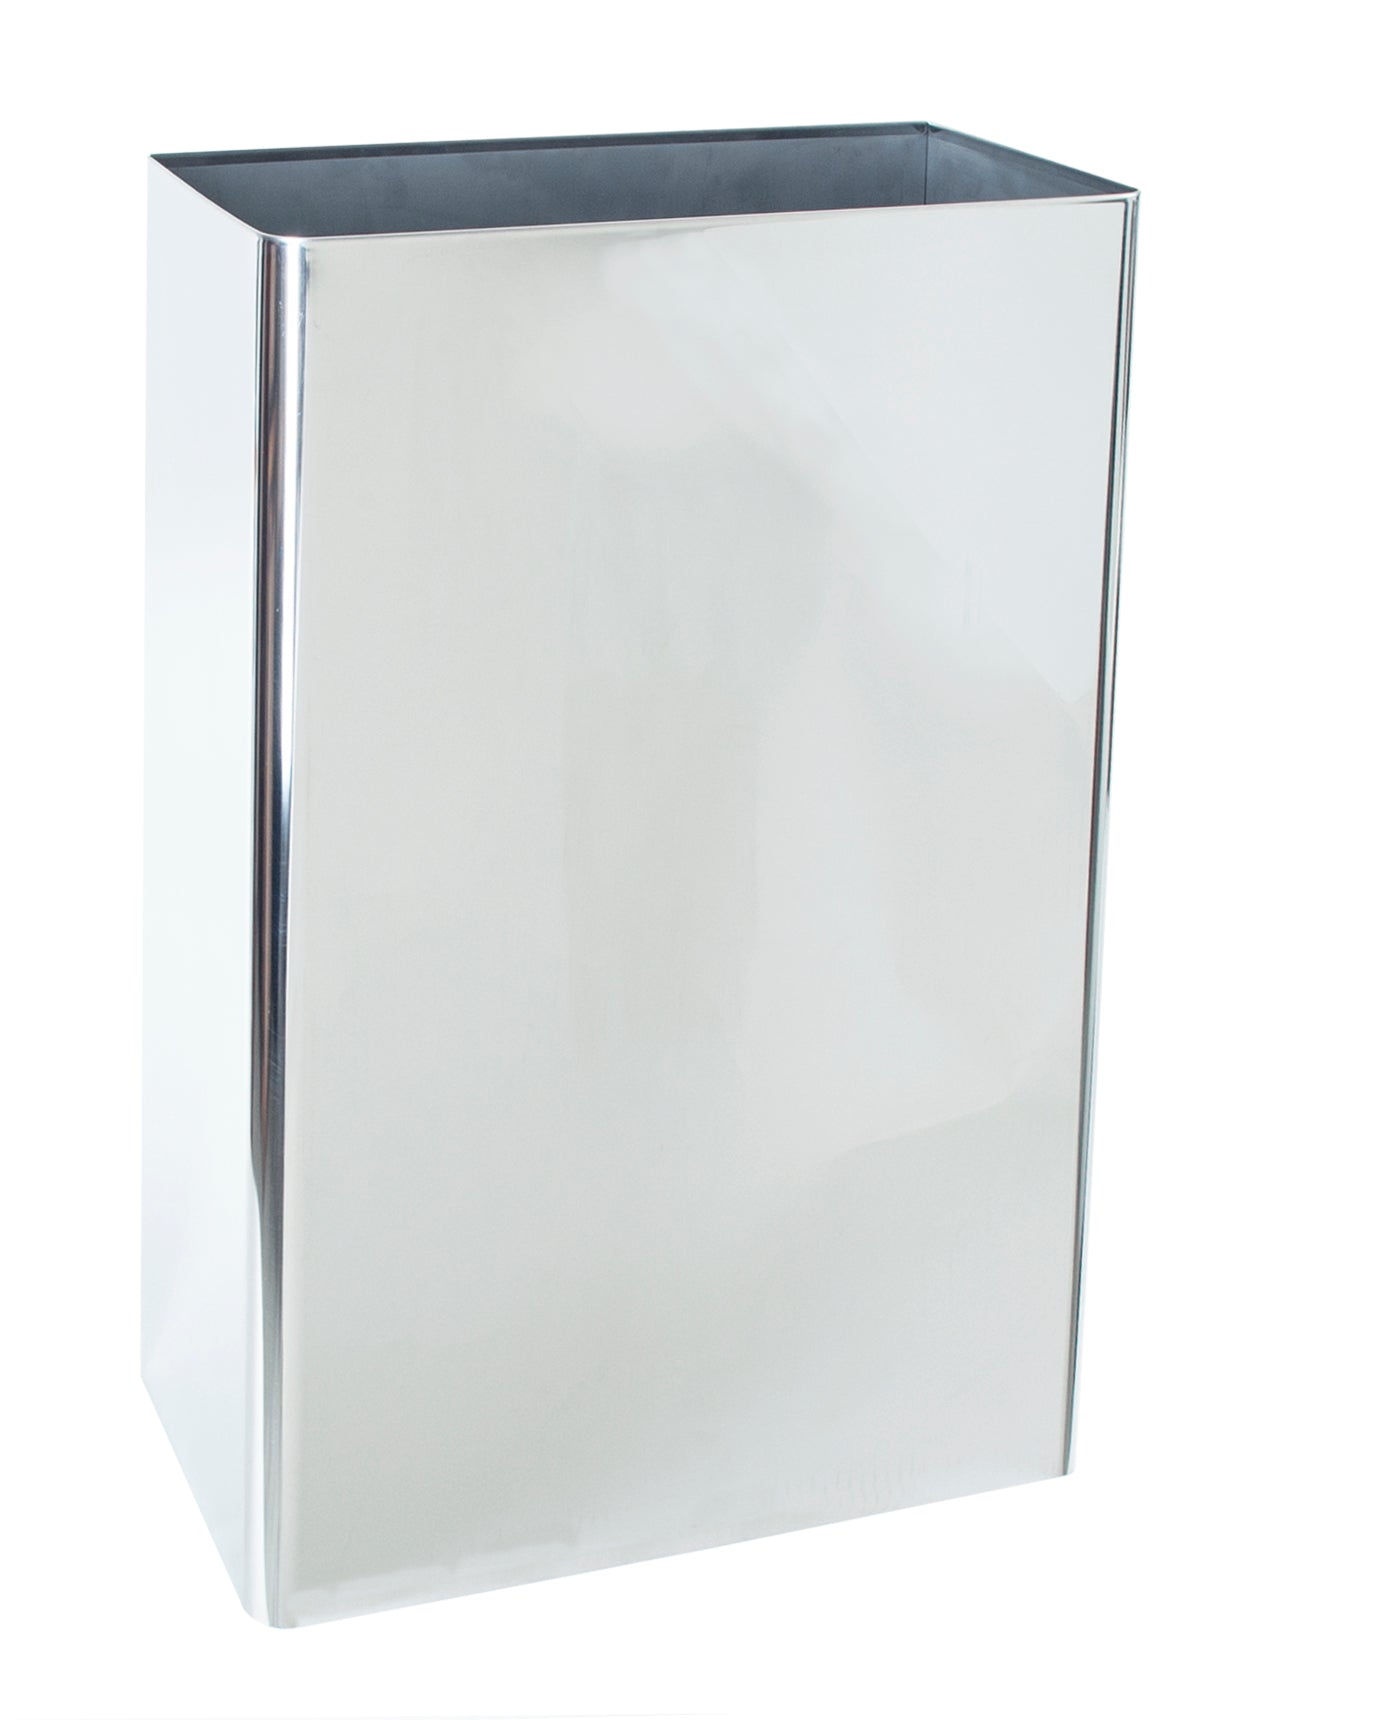 SWB-9 Surface Mounted Waste Basket In Polished Stainless Steel